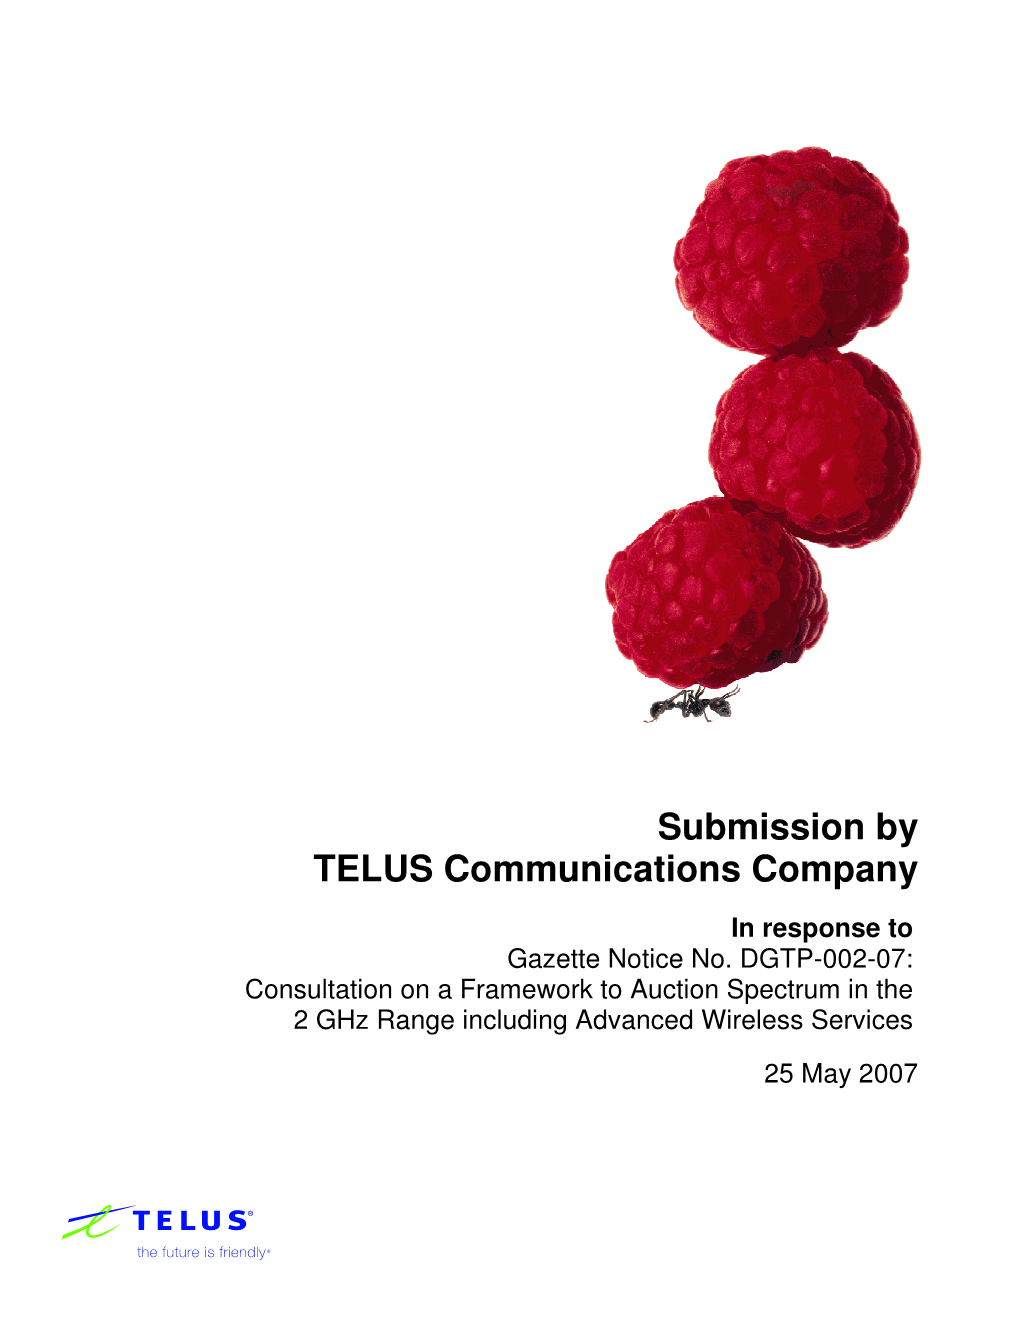 Submission by TELUS Communications Company